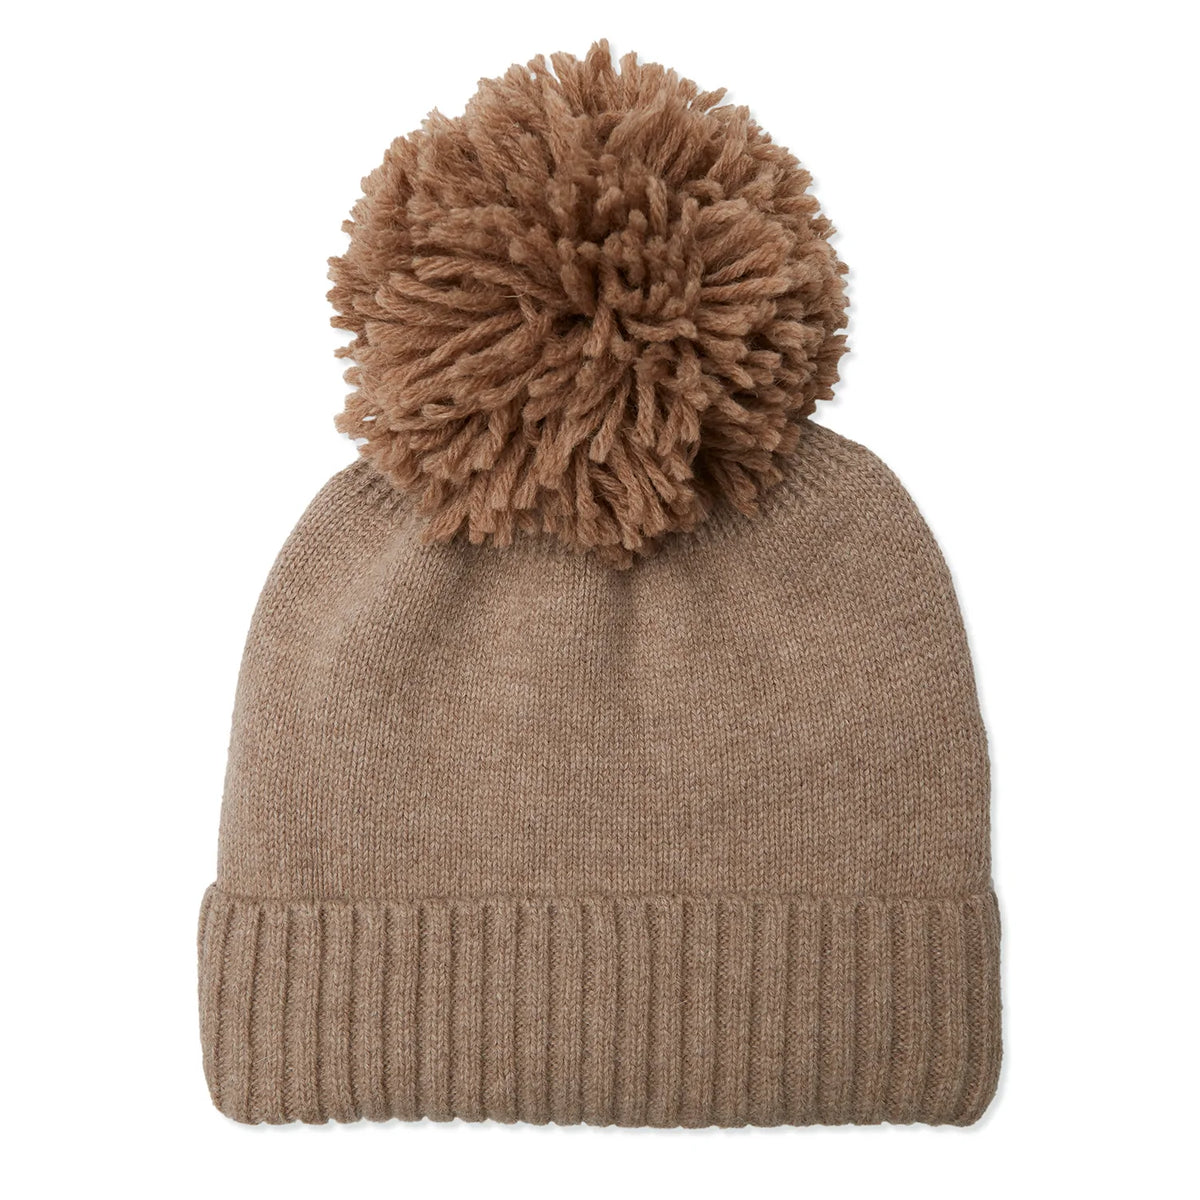 Bobble hat with removable bobble in camel